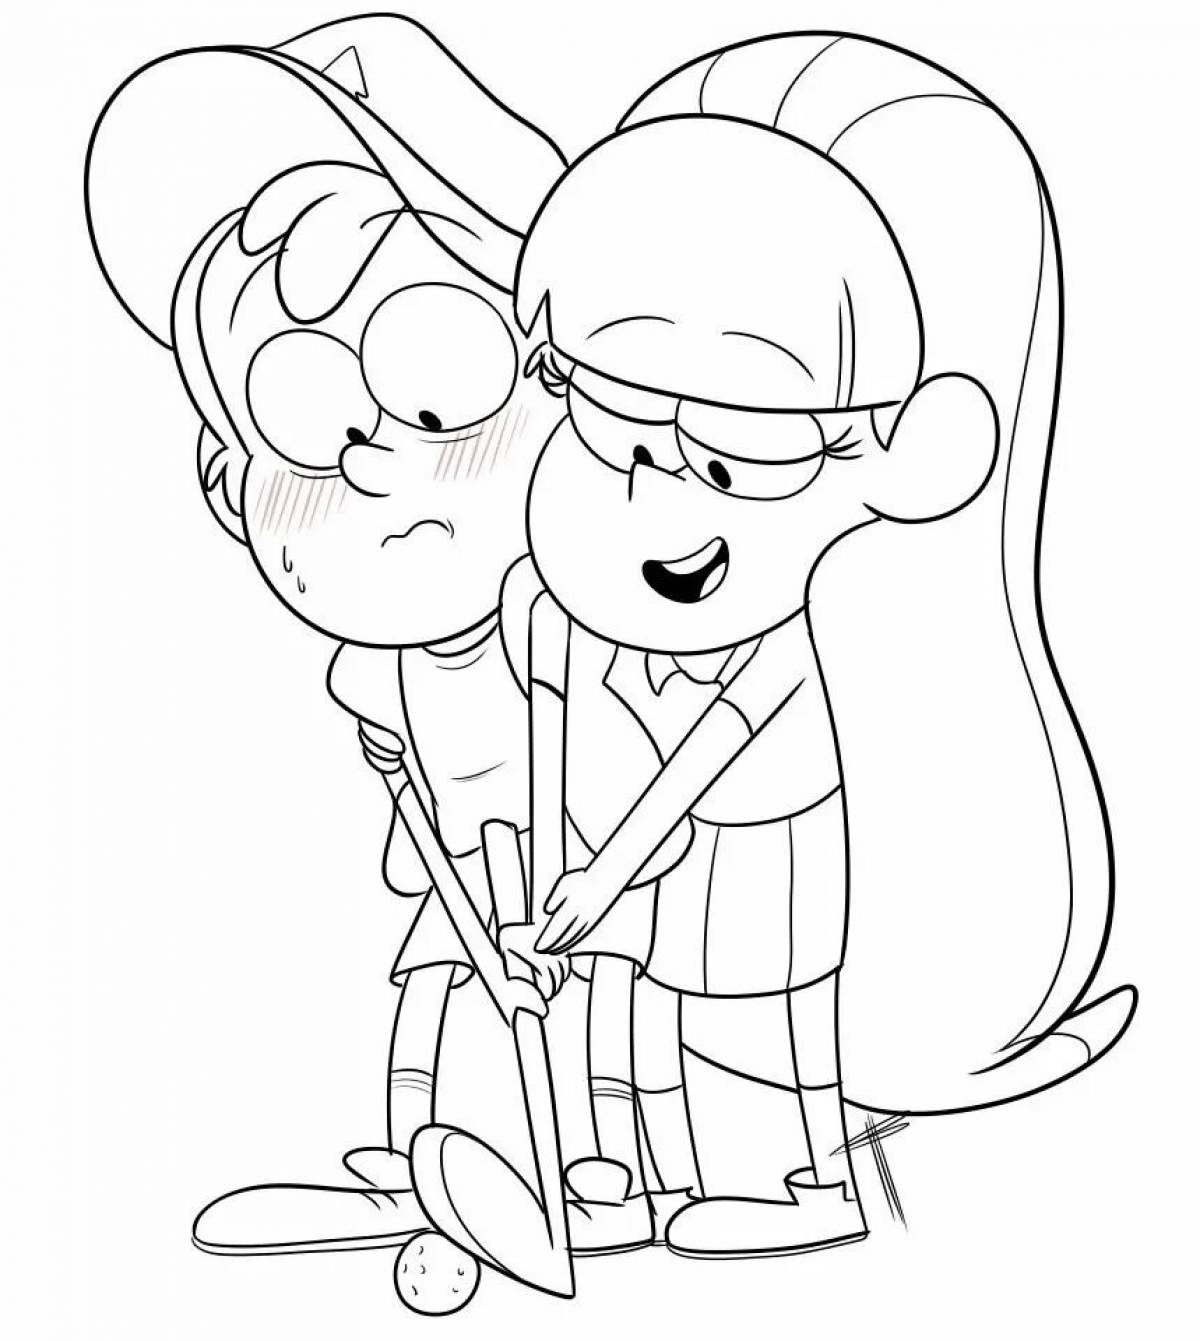 Charming dipper and mabel coloring